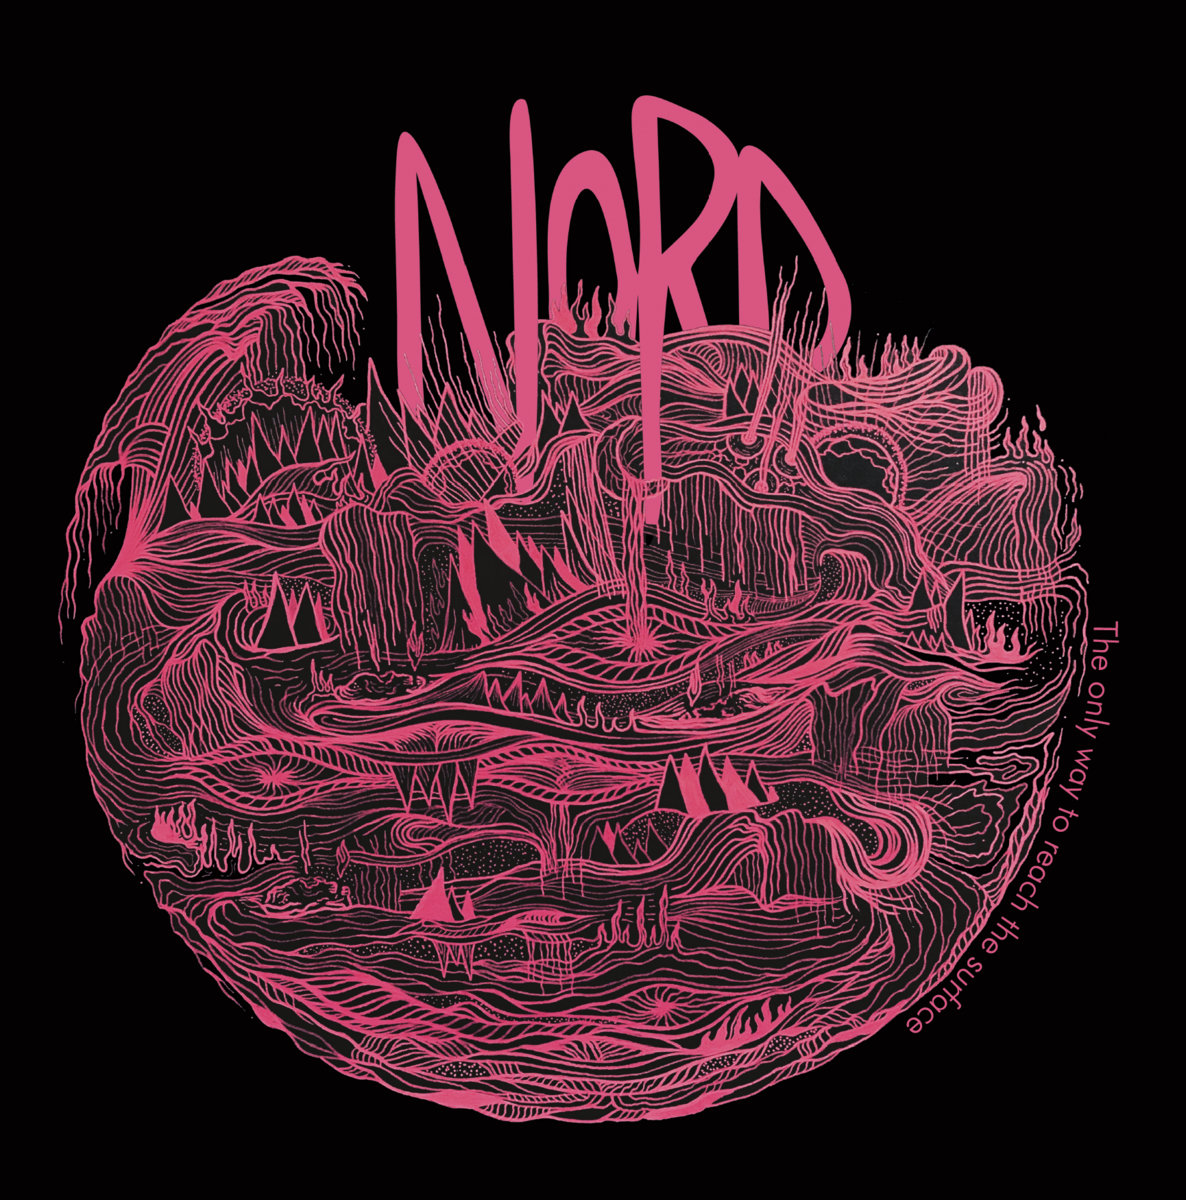 Nord – The Only Way to Reach the Surface